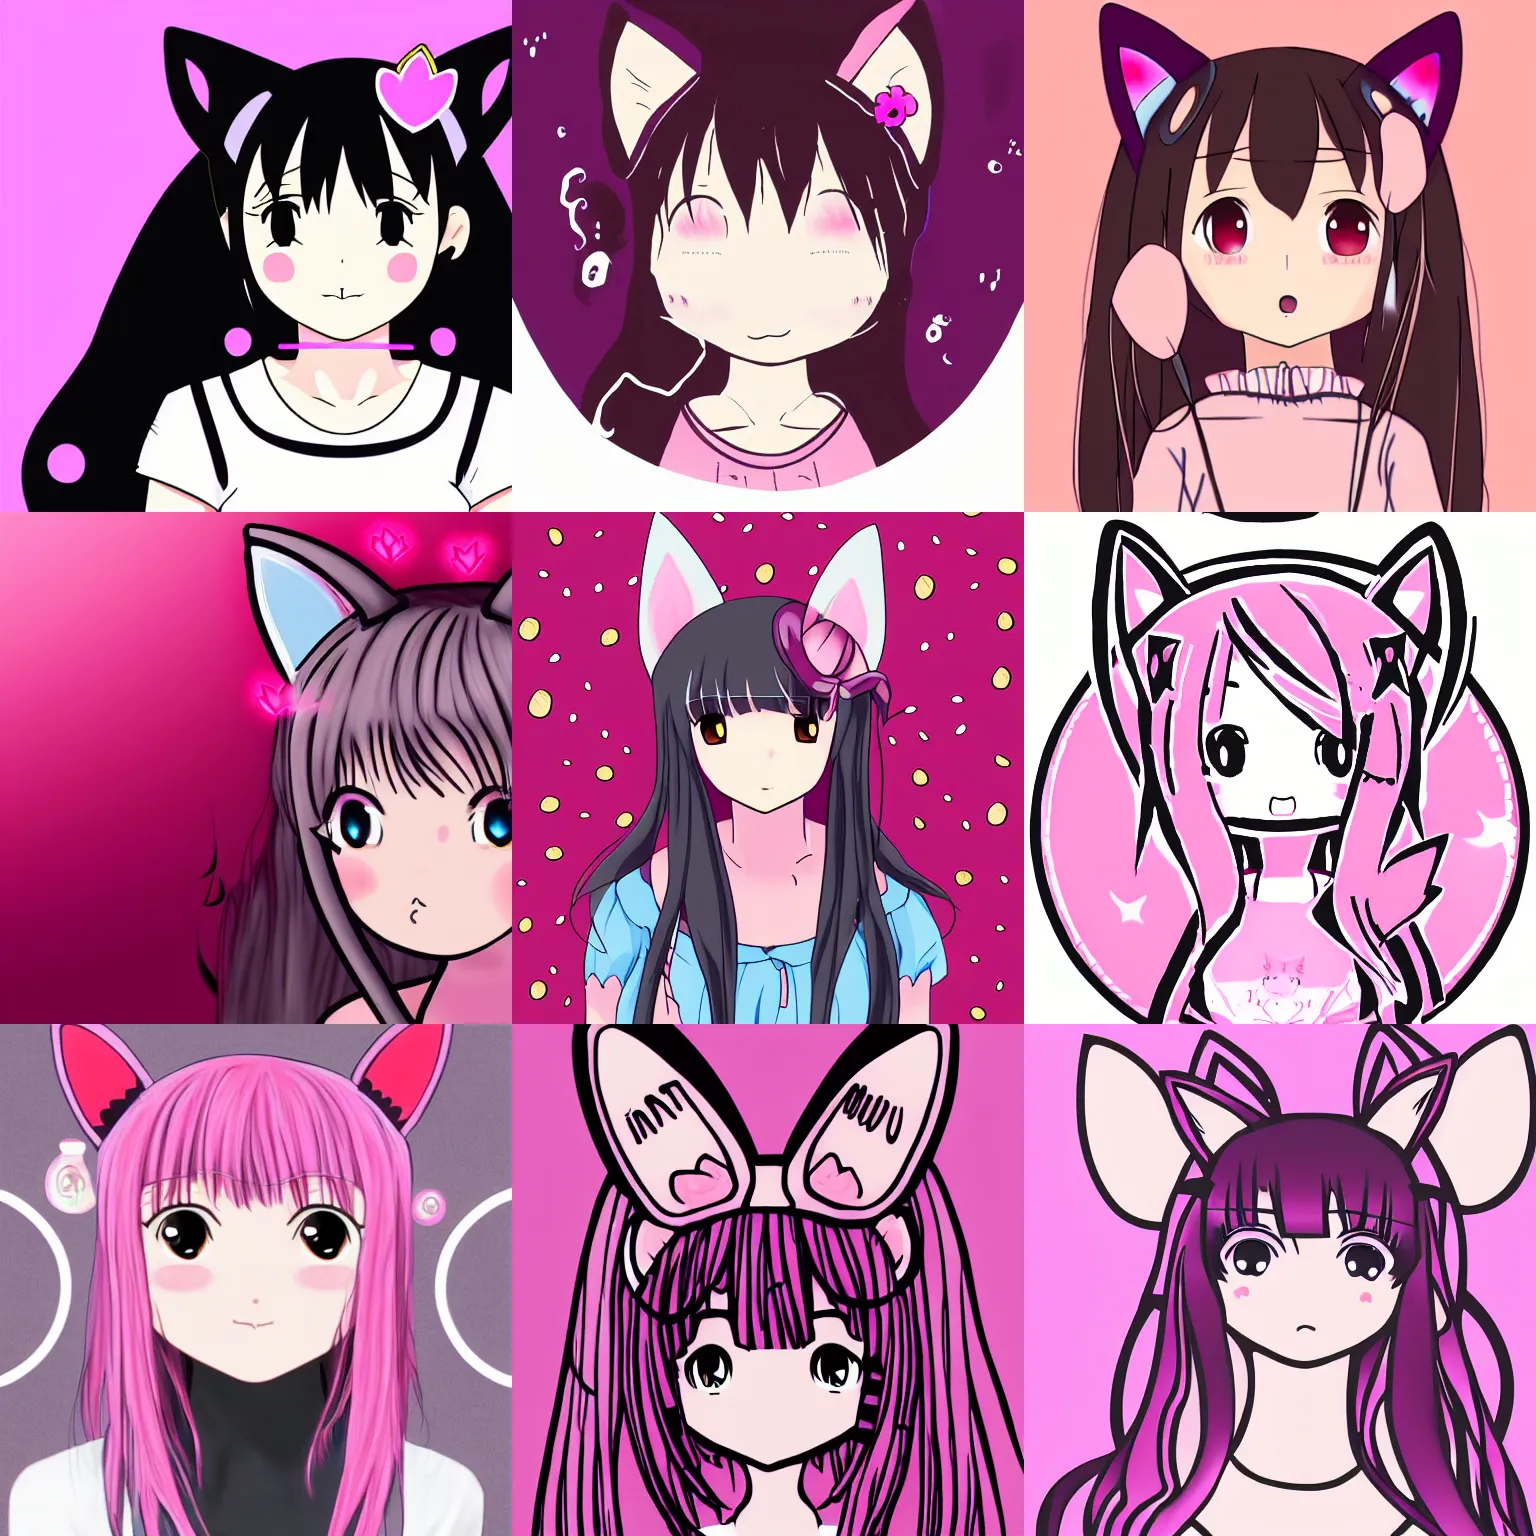 Prompt: frontal portrait of a cute anime (cat) girl with cat ears drawing magic circles. Pink hue.